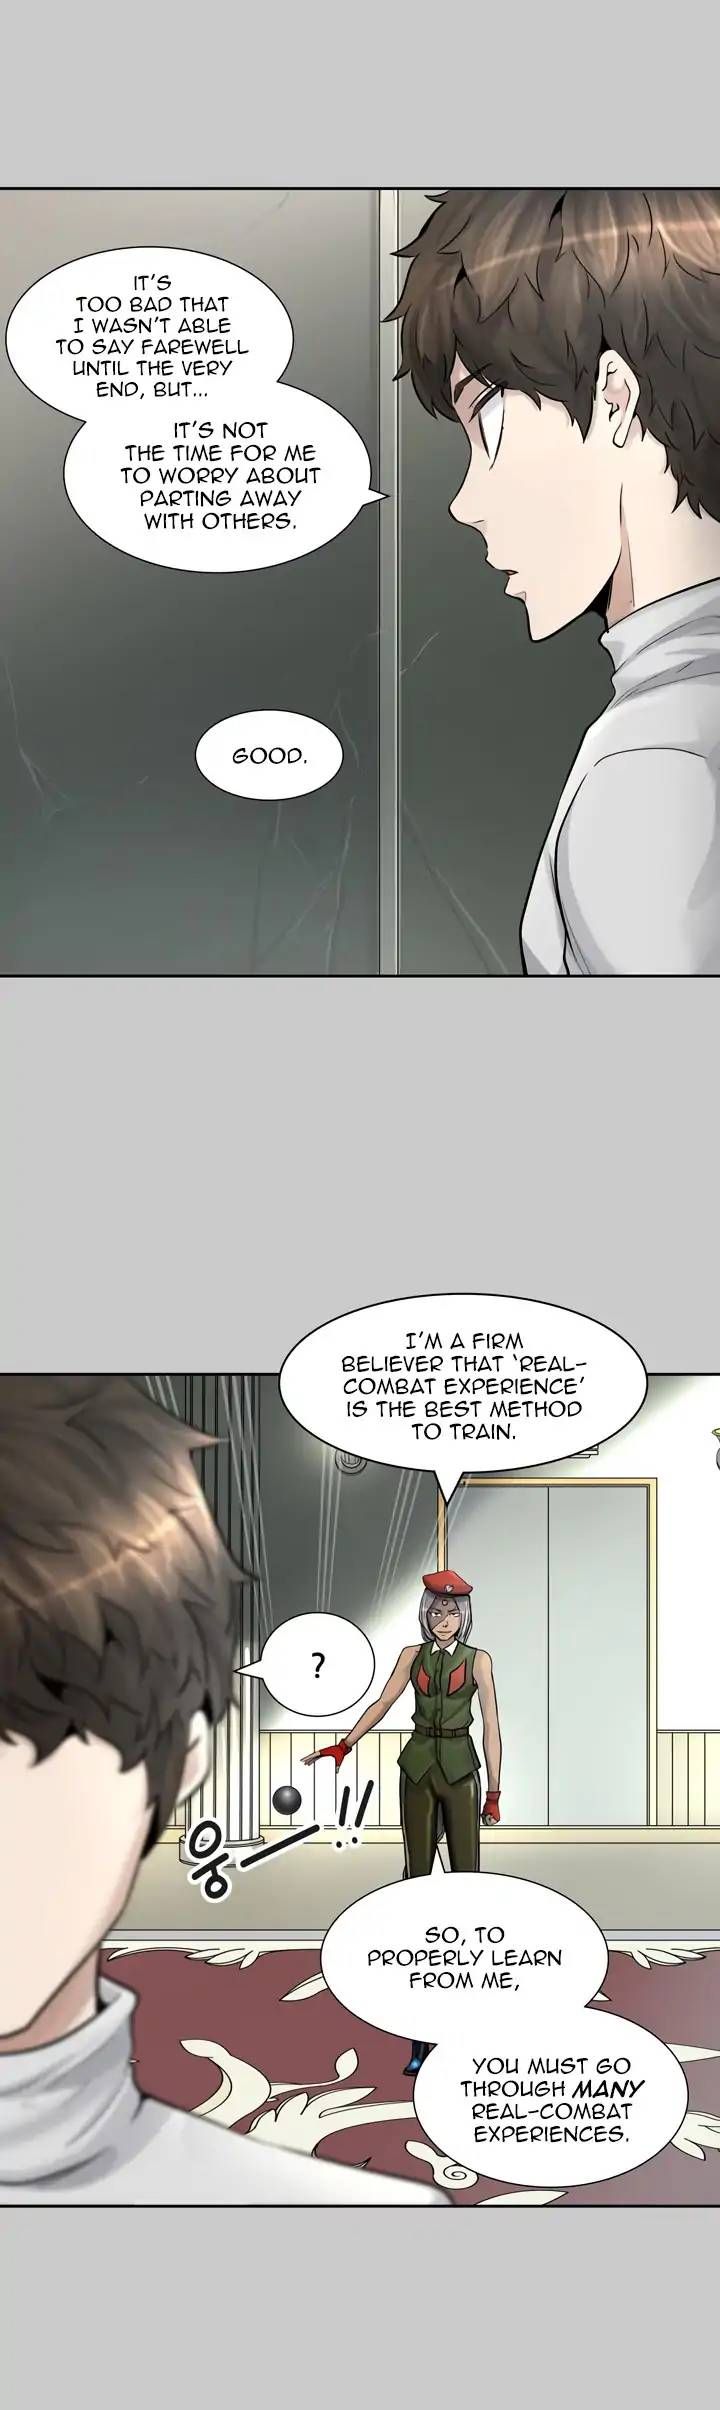 Tower Of God 418 38